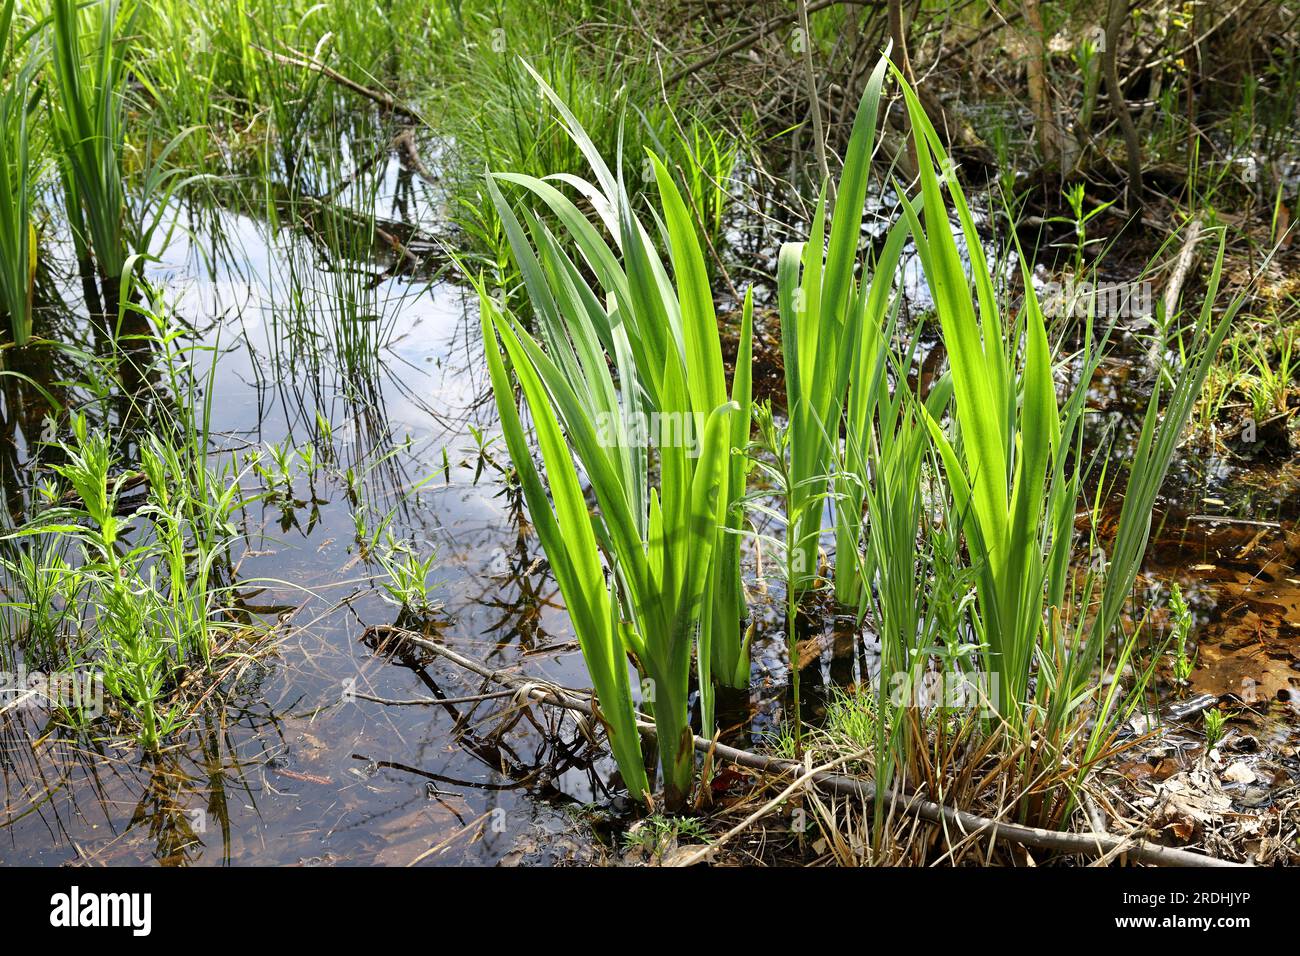 Acorus calamus, sweet flag, young grass in the pond in the pond lit by the rays of the sun Stock Photo